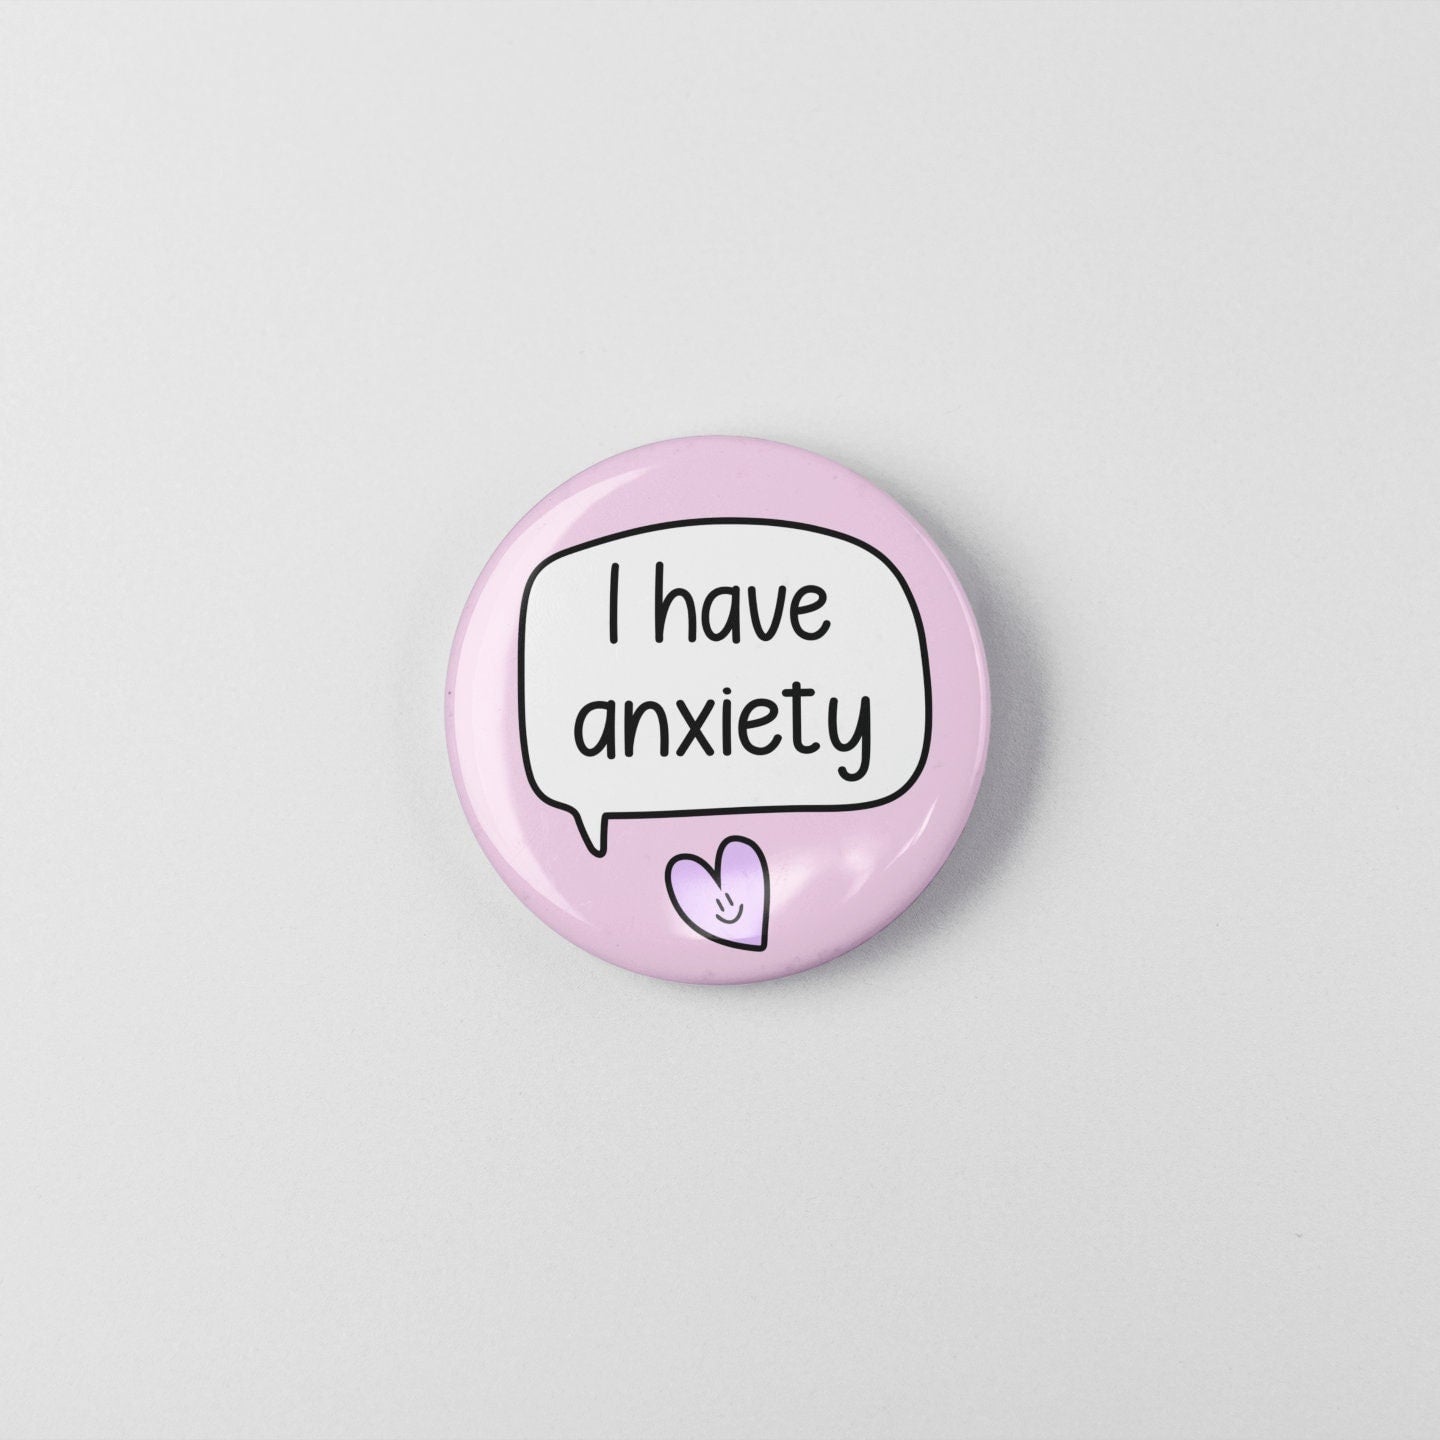 I have Anxiety Badge | Mental Health Awareness - Anxiety Badges - Anxious Button Badge